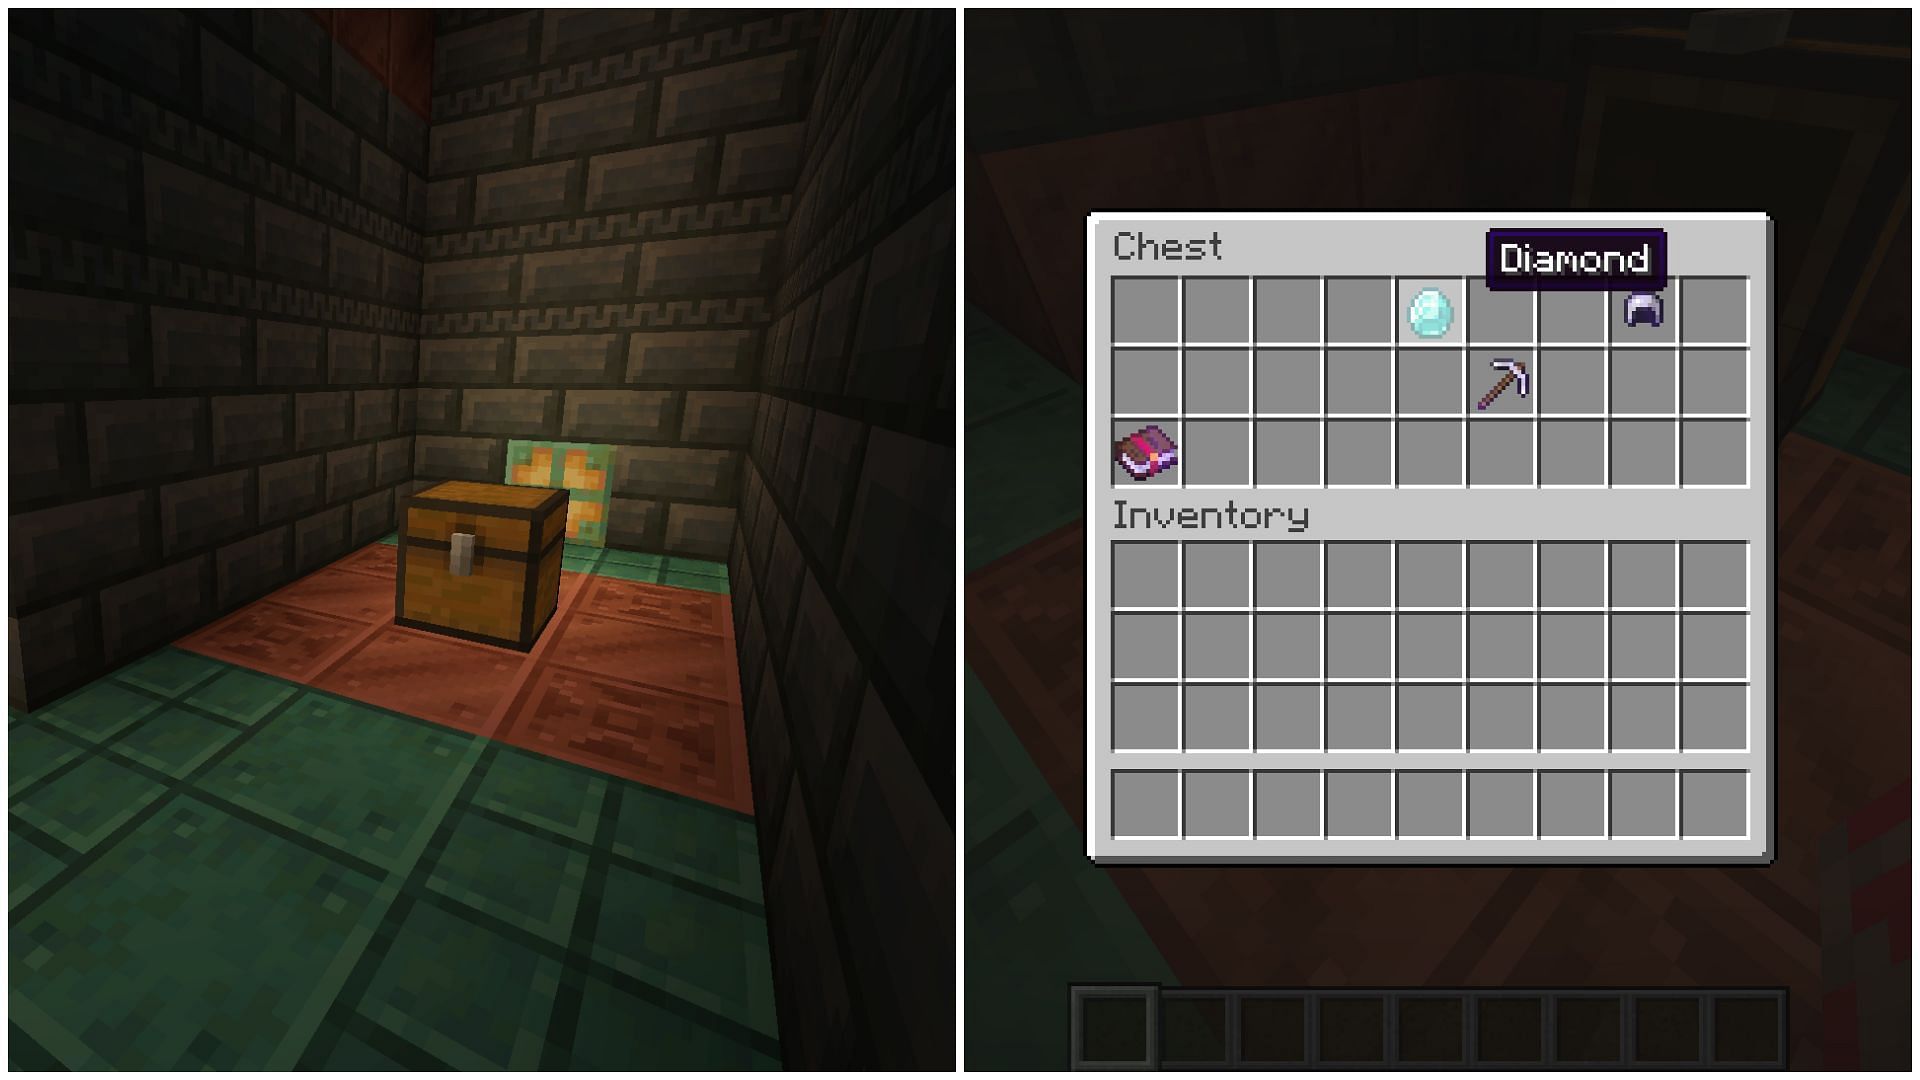 Chests in trial chambers mostly have mid-tier loot with rare, valuable items in Minecraft (Image via Sportskeeda)